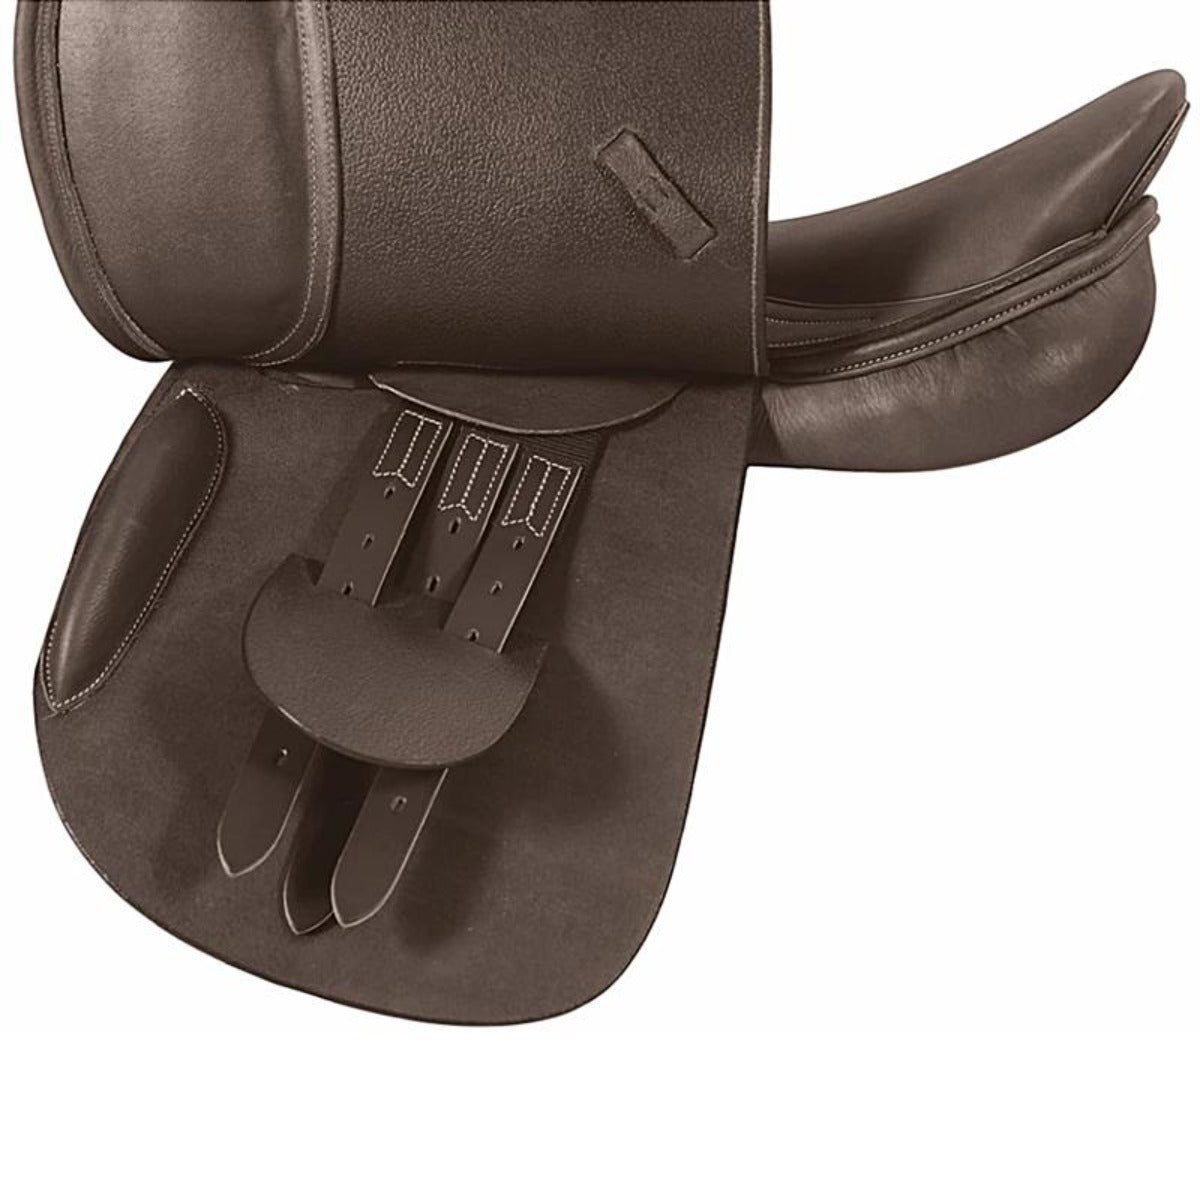 HDR Pro Pony Covered Close Contact Saddle